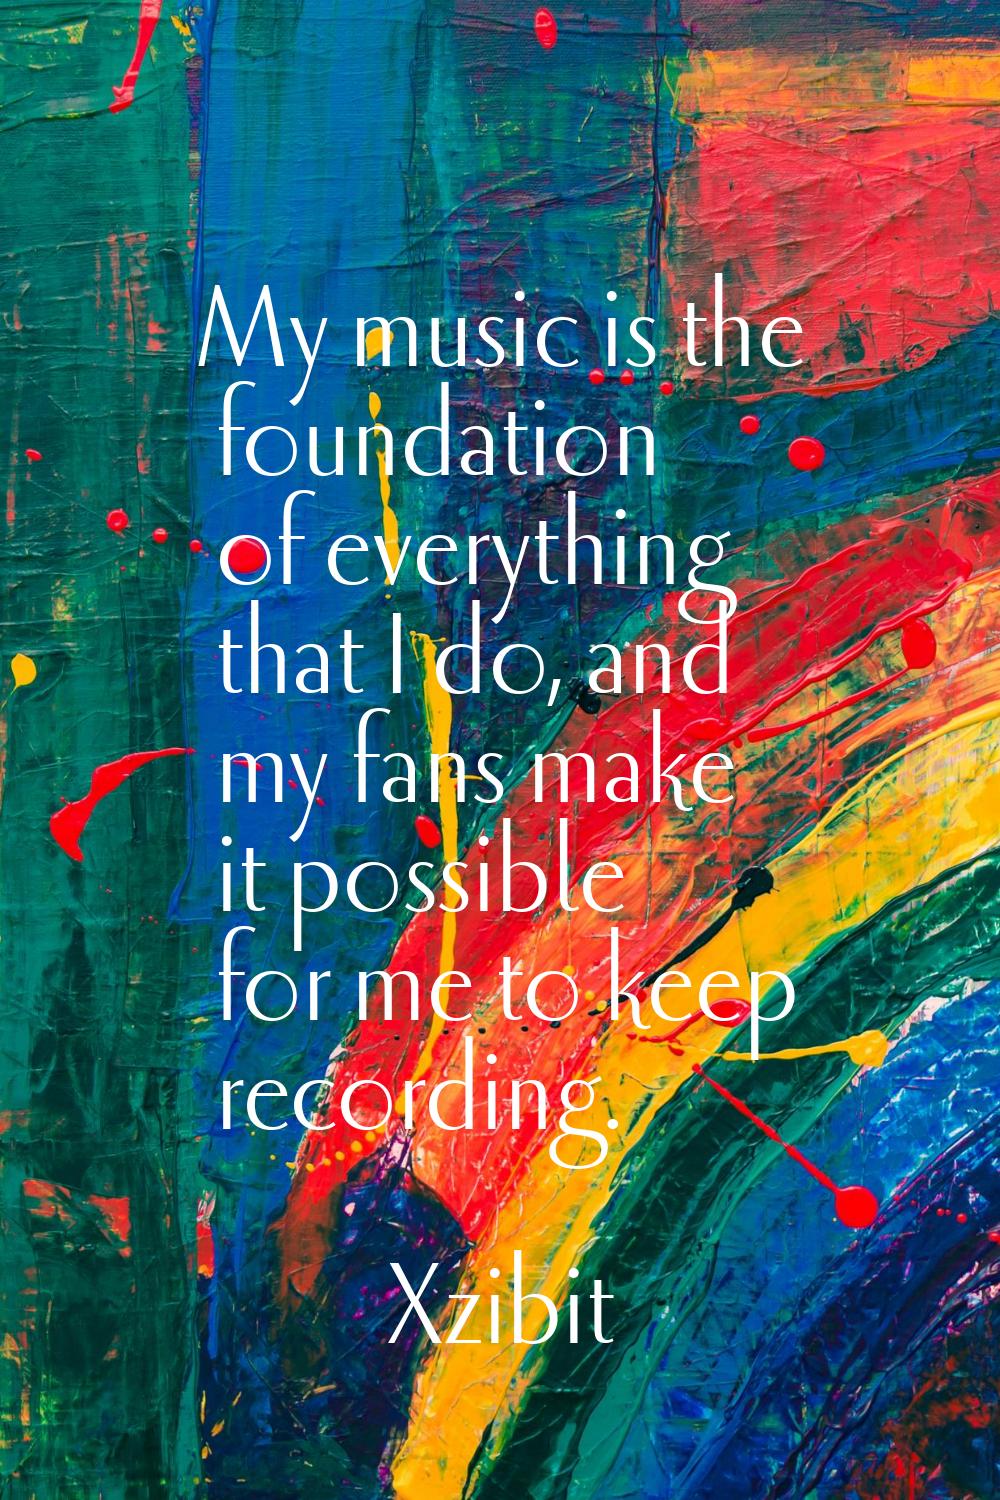 My music is the foundation of everything that I do, and my fans make it possible for me to keep rec